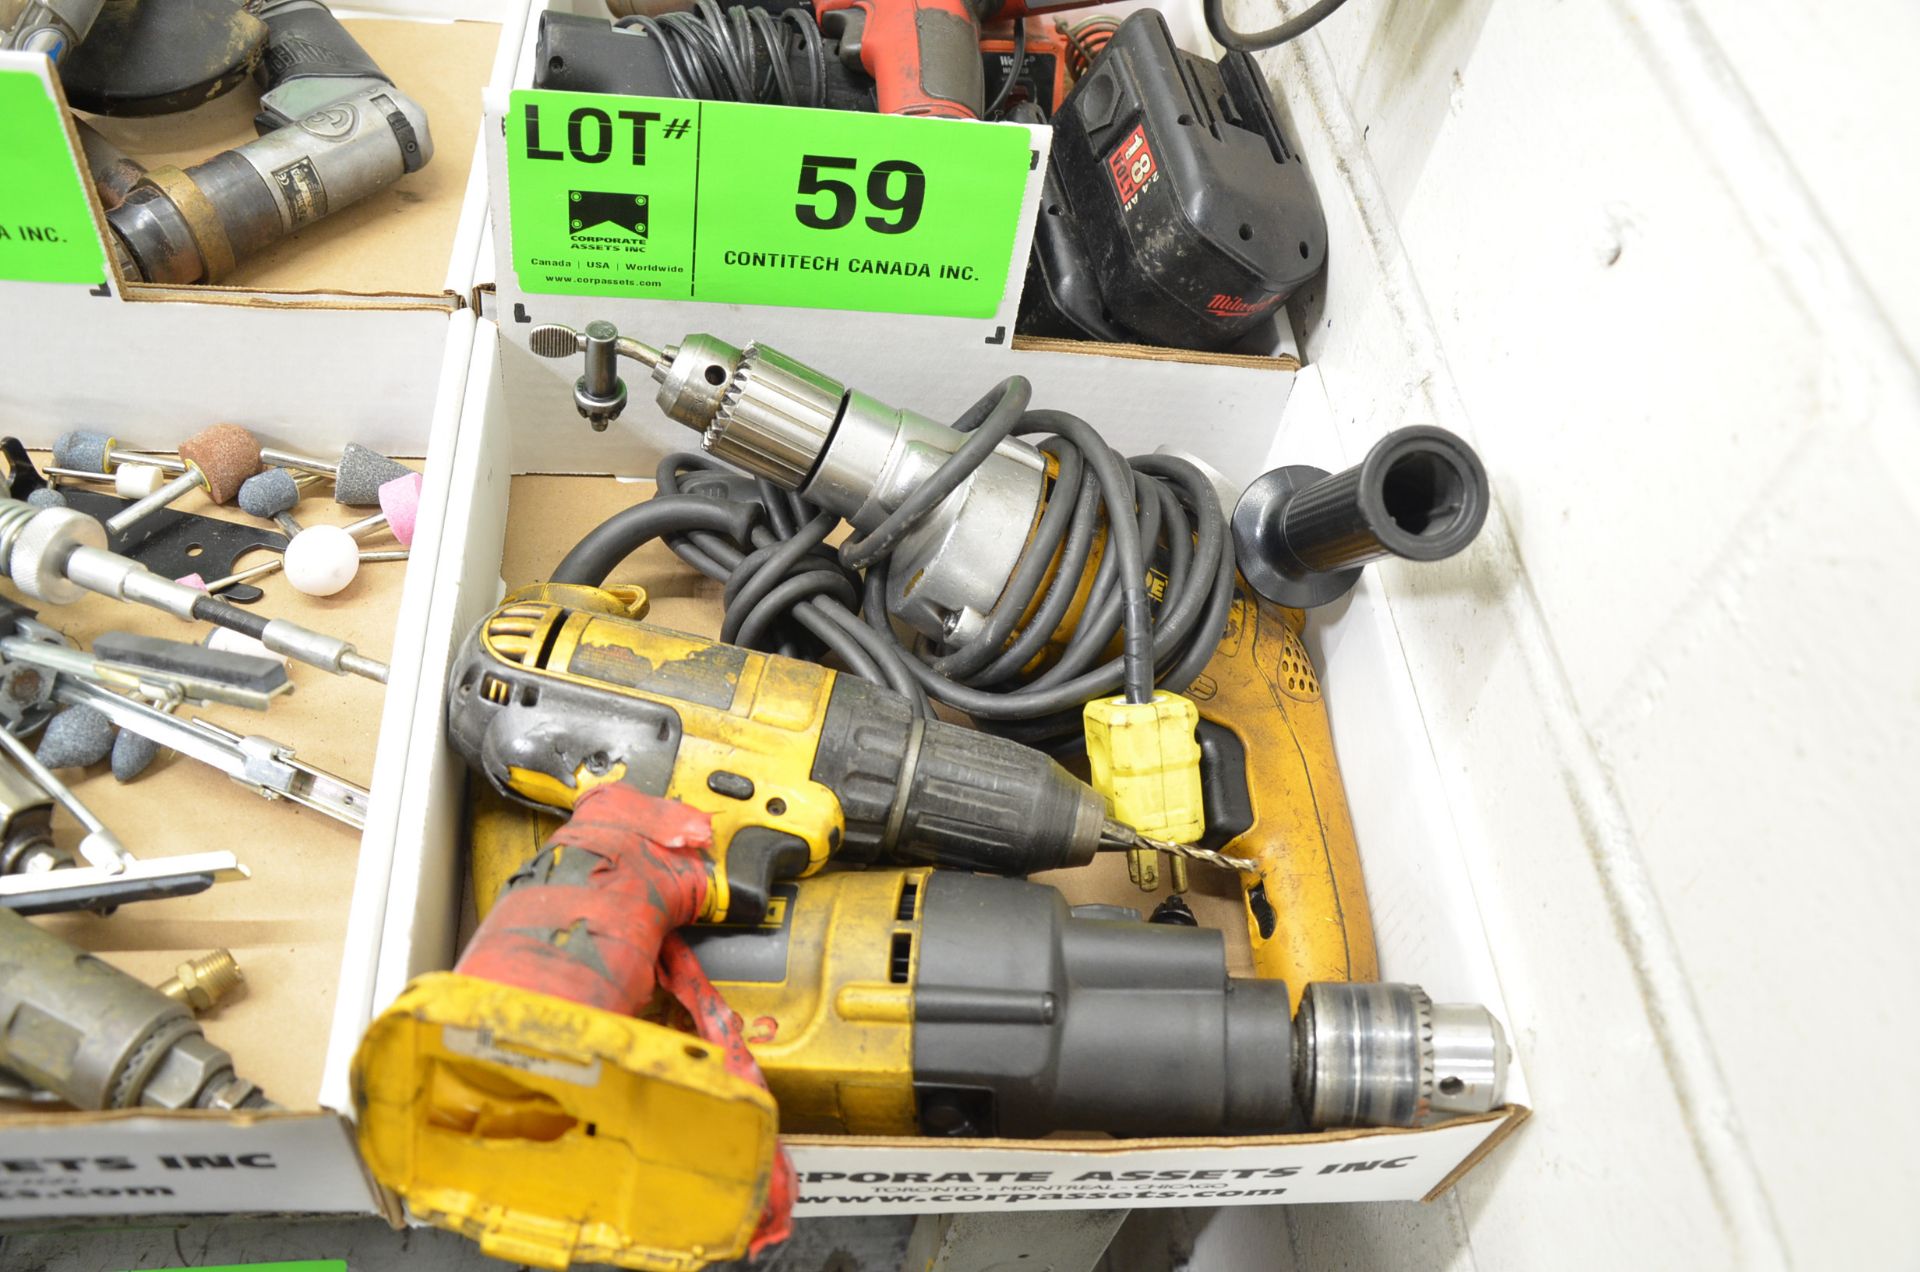 LOT/ (2) ELECTRIC POWER TOOLS [RIGGING FEE FOR LOT #59 - $20 USD PLUS APPLICABLE TAXES]